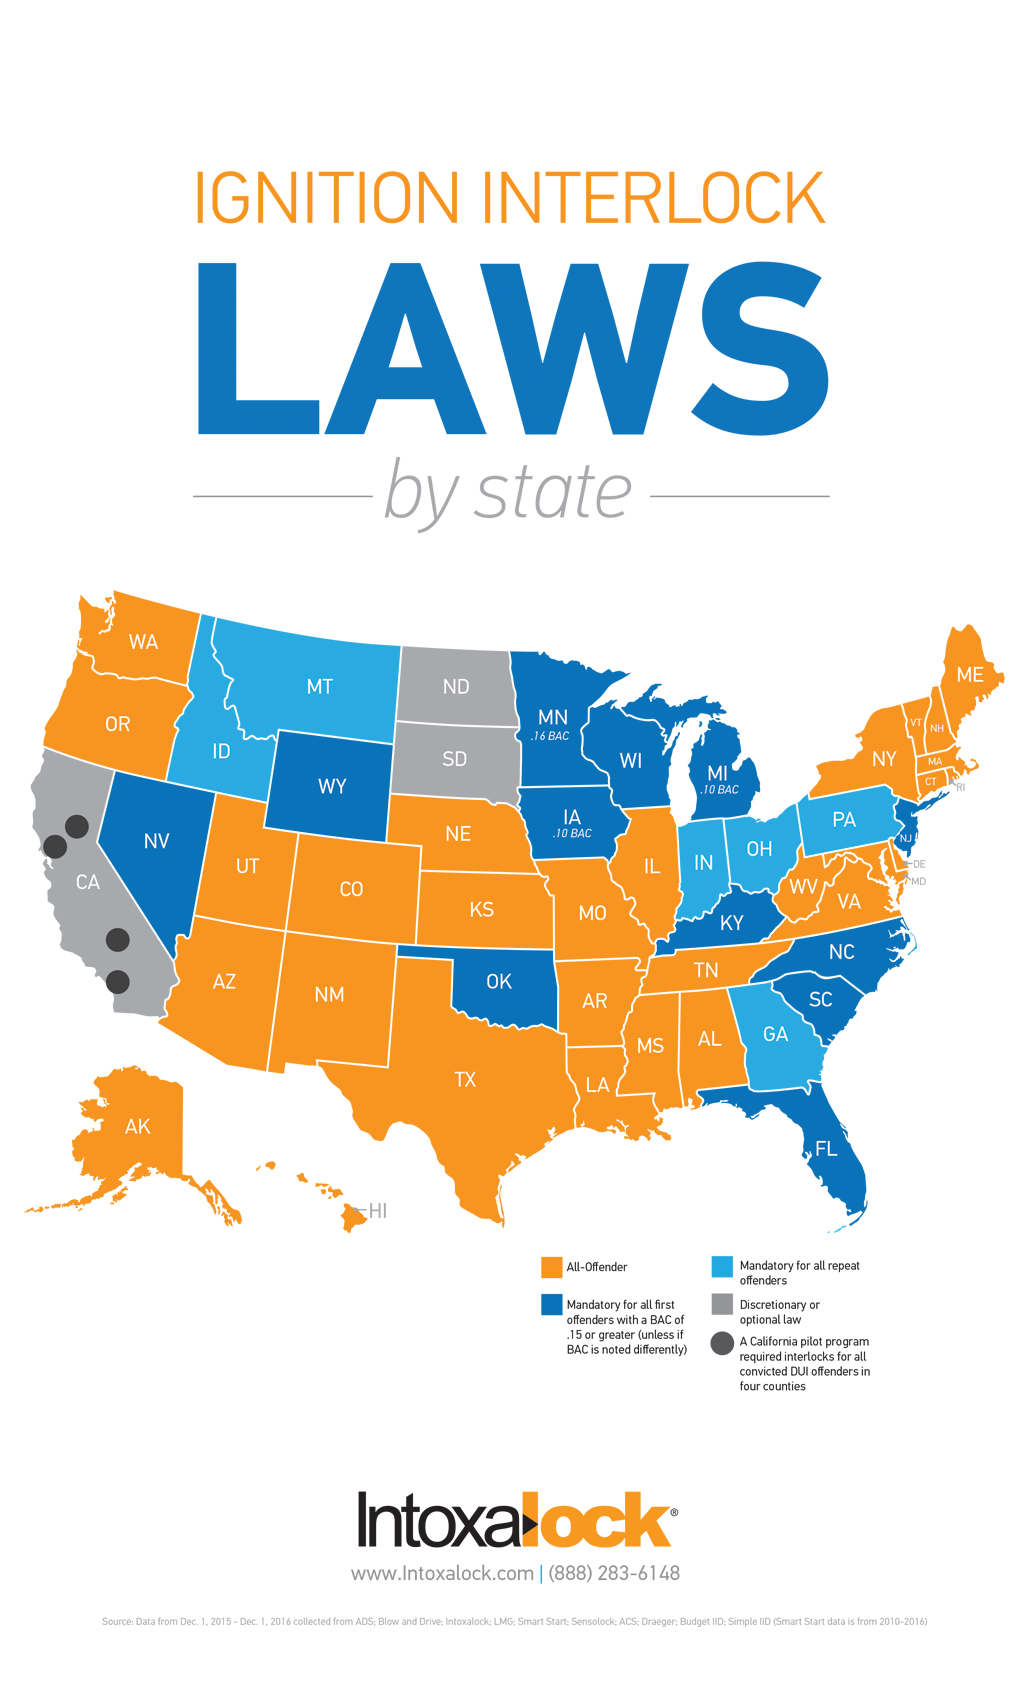 Ignition interlock laws by state